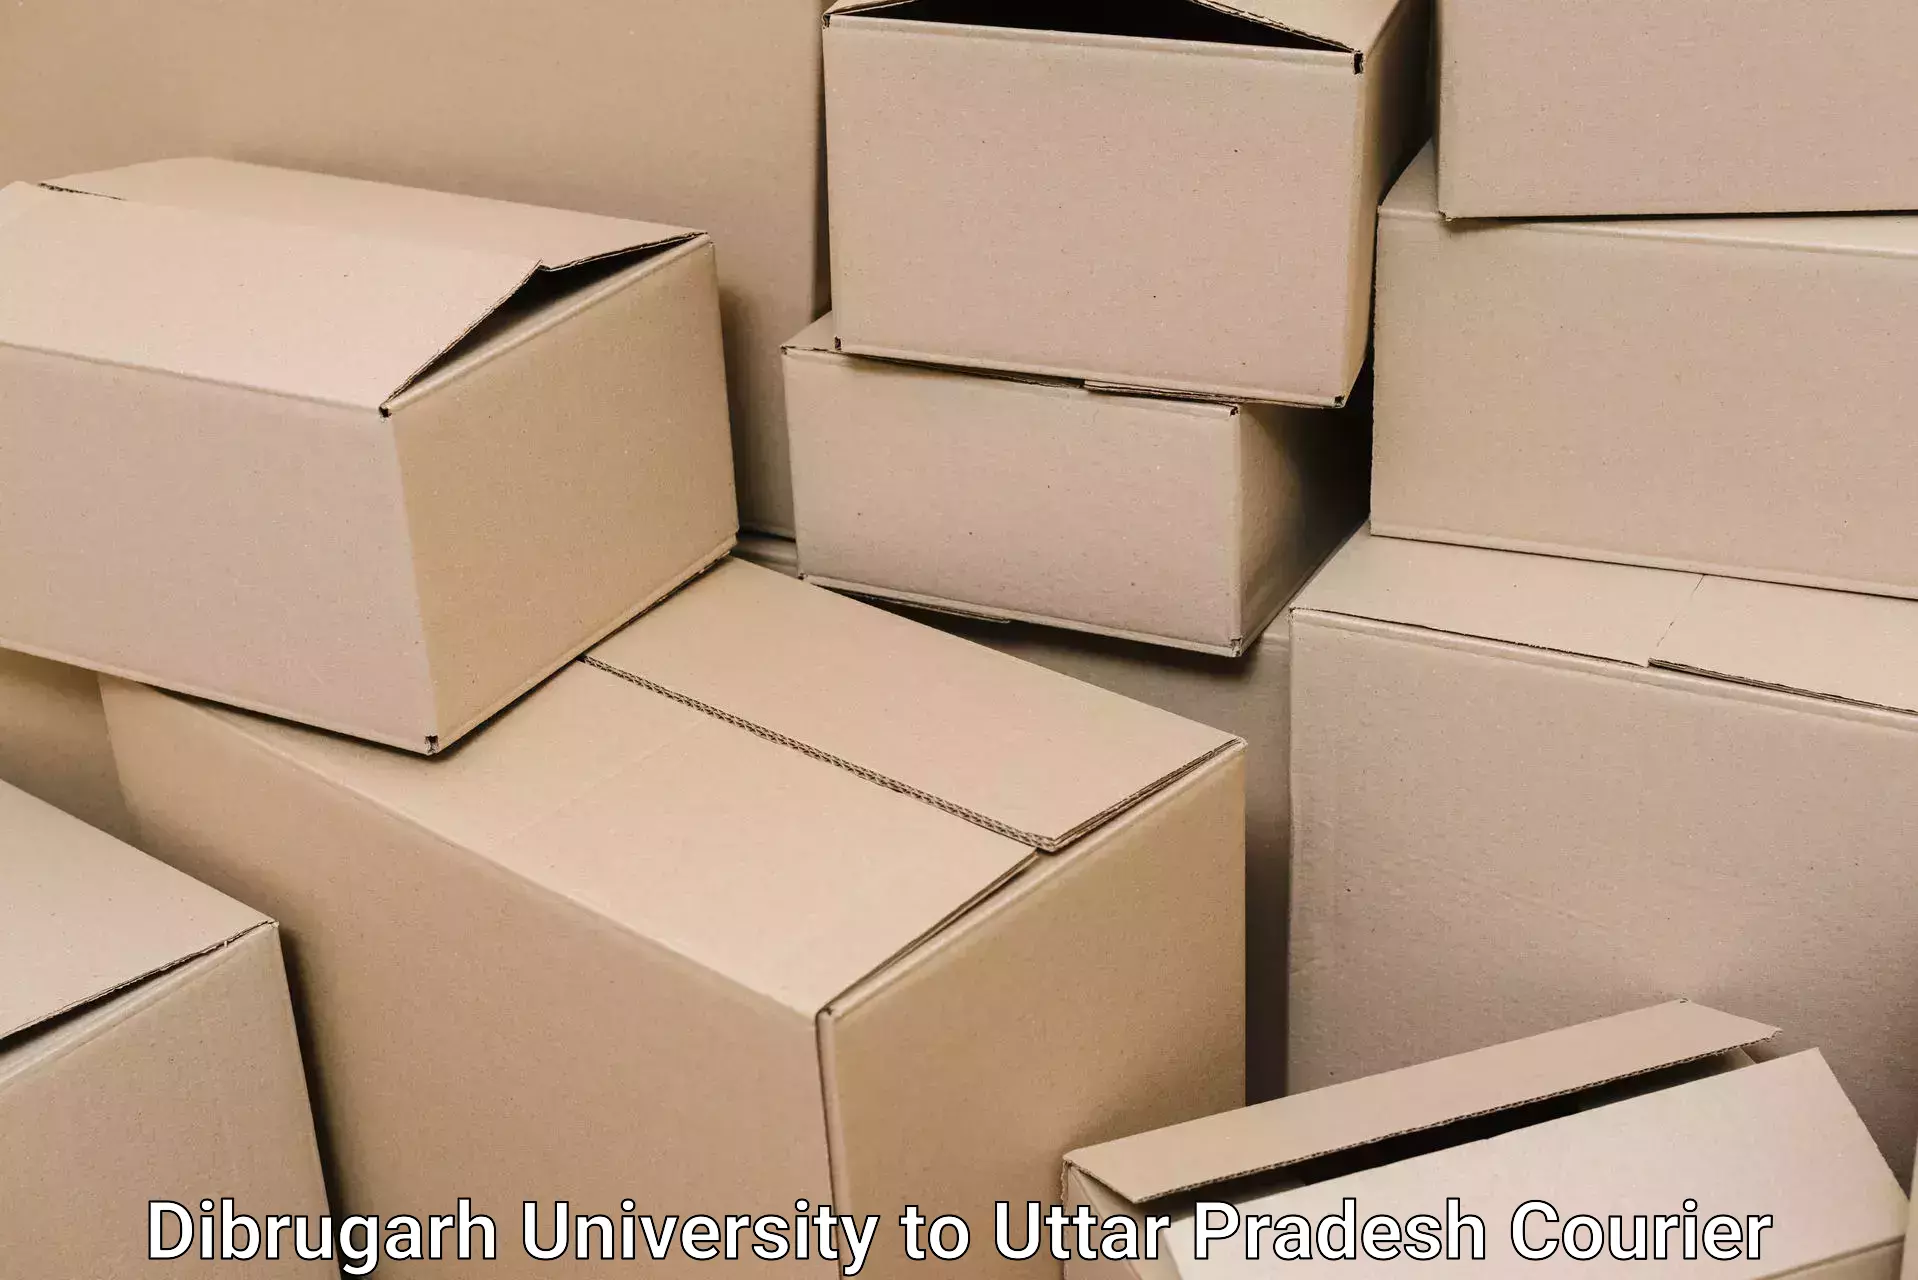 Efficient packing services in Dibrugarh University to IIT Kanpur